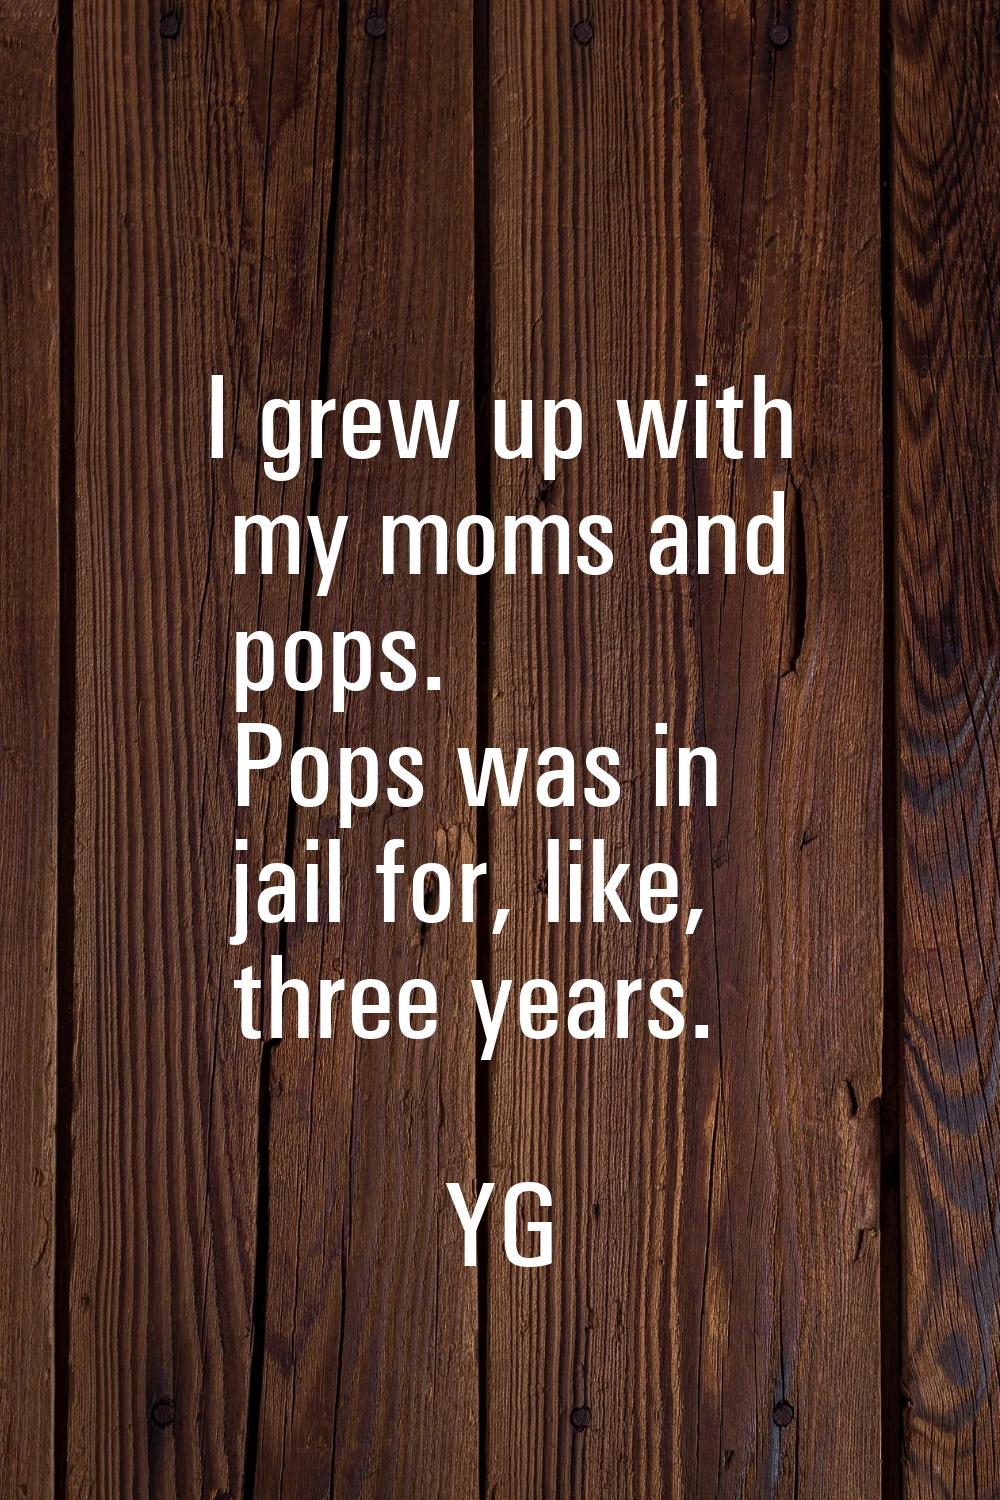 I grew up with my moms and pops. Pops was in jail for, like, three years.